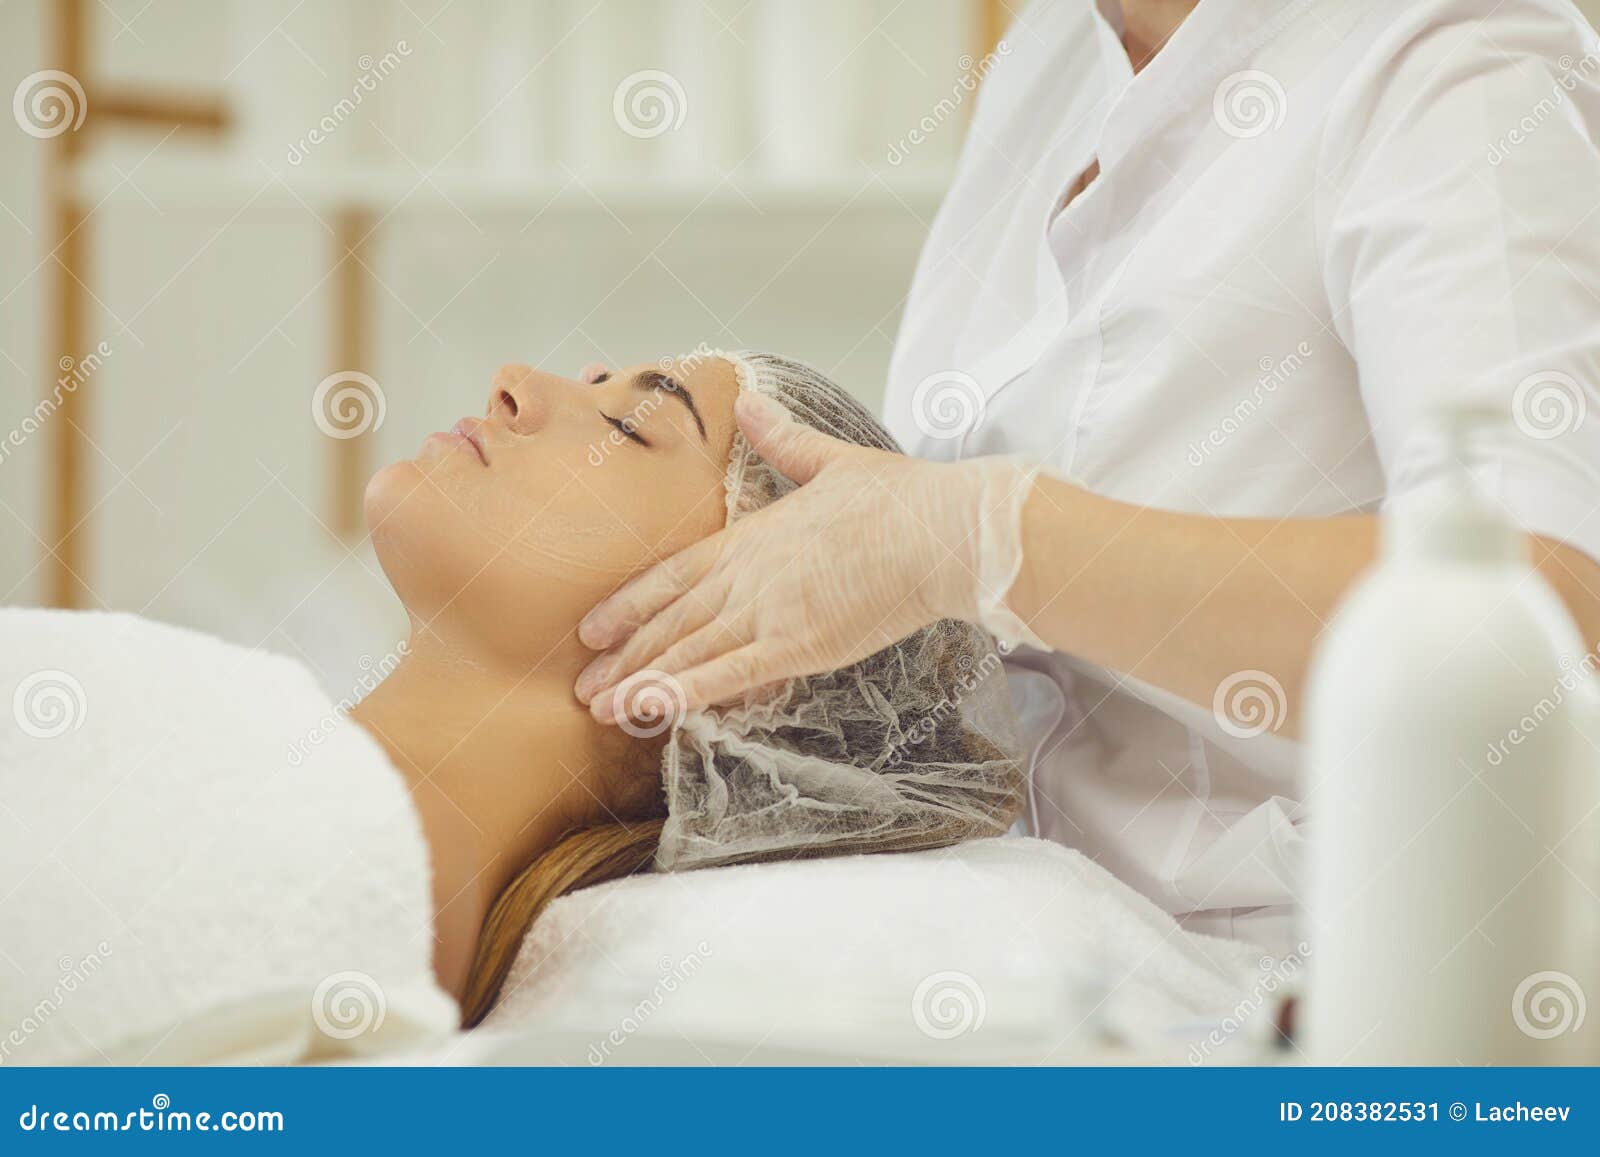 Hands Of Massuer Making Lifting Facial Massage For Young Woman Stock Image Image Of Facial